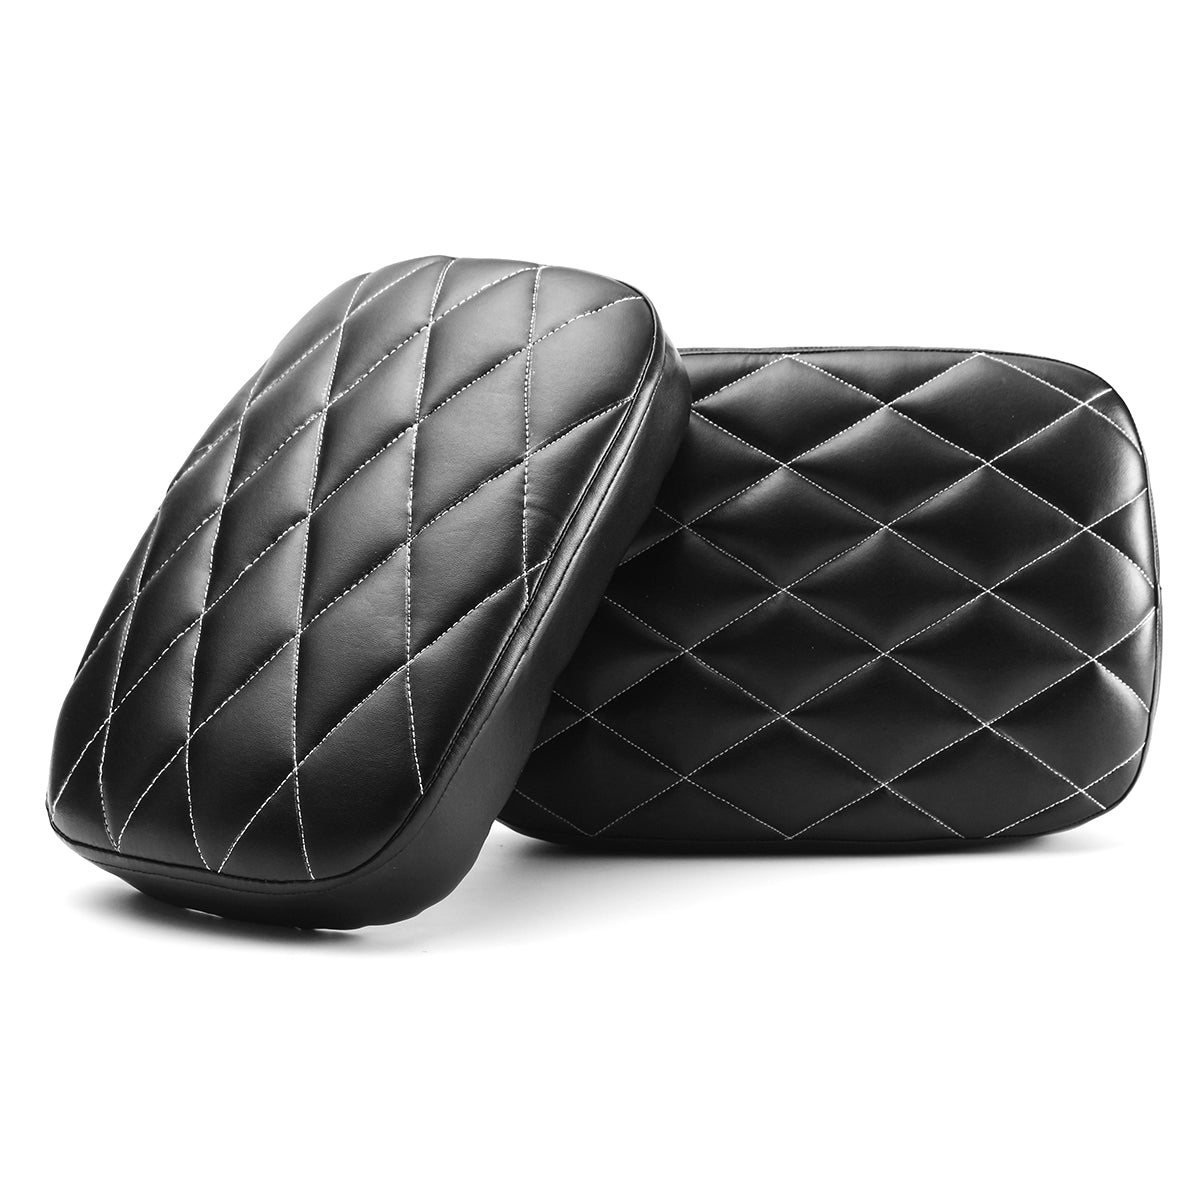 Black Rear Passenger Pillion Leather Seat Pad 6Suction 8 Suction Cup For Harley Softail Dyna